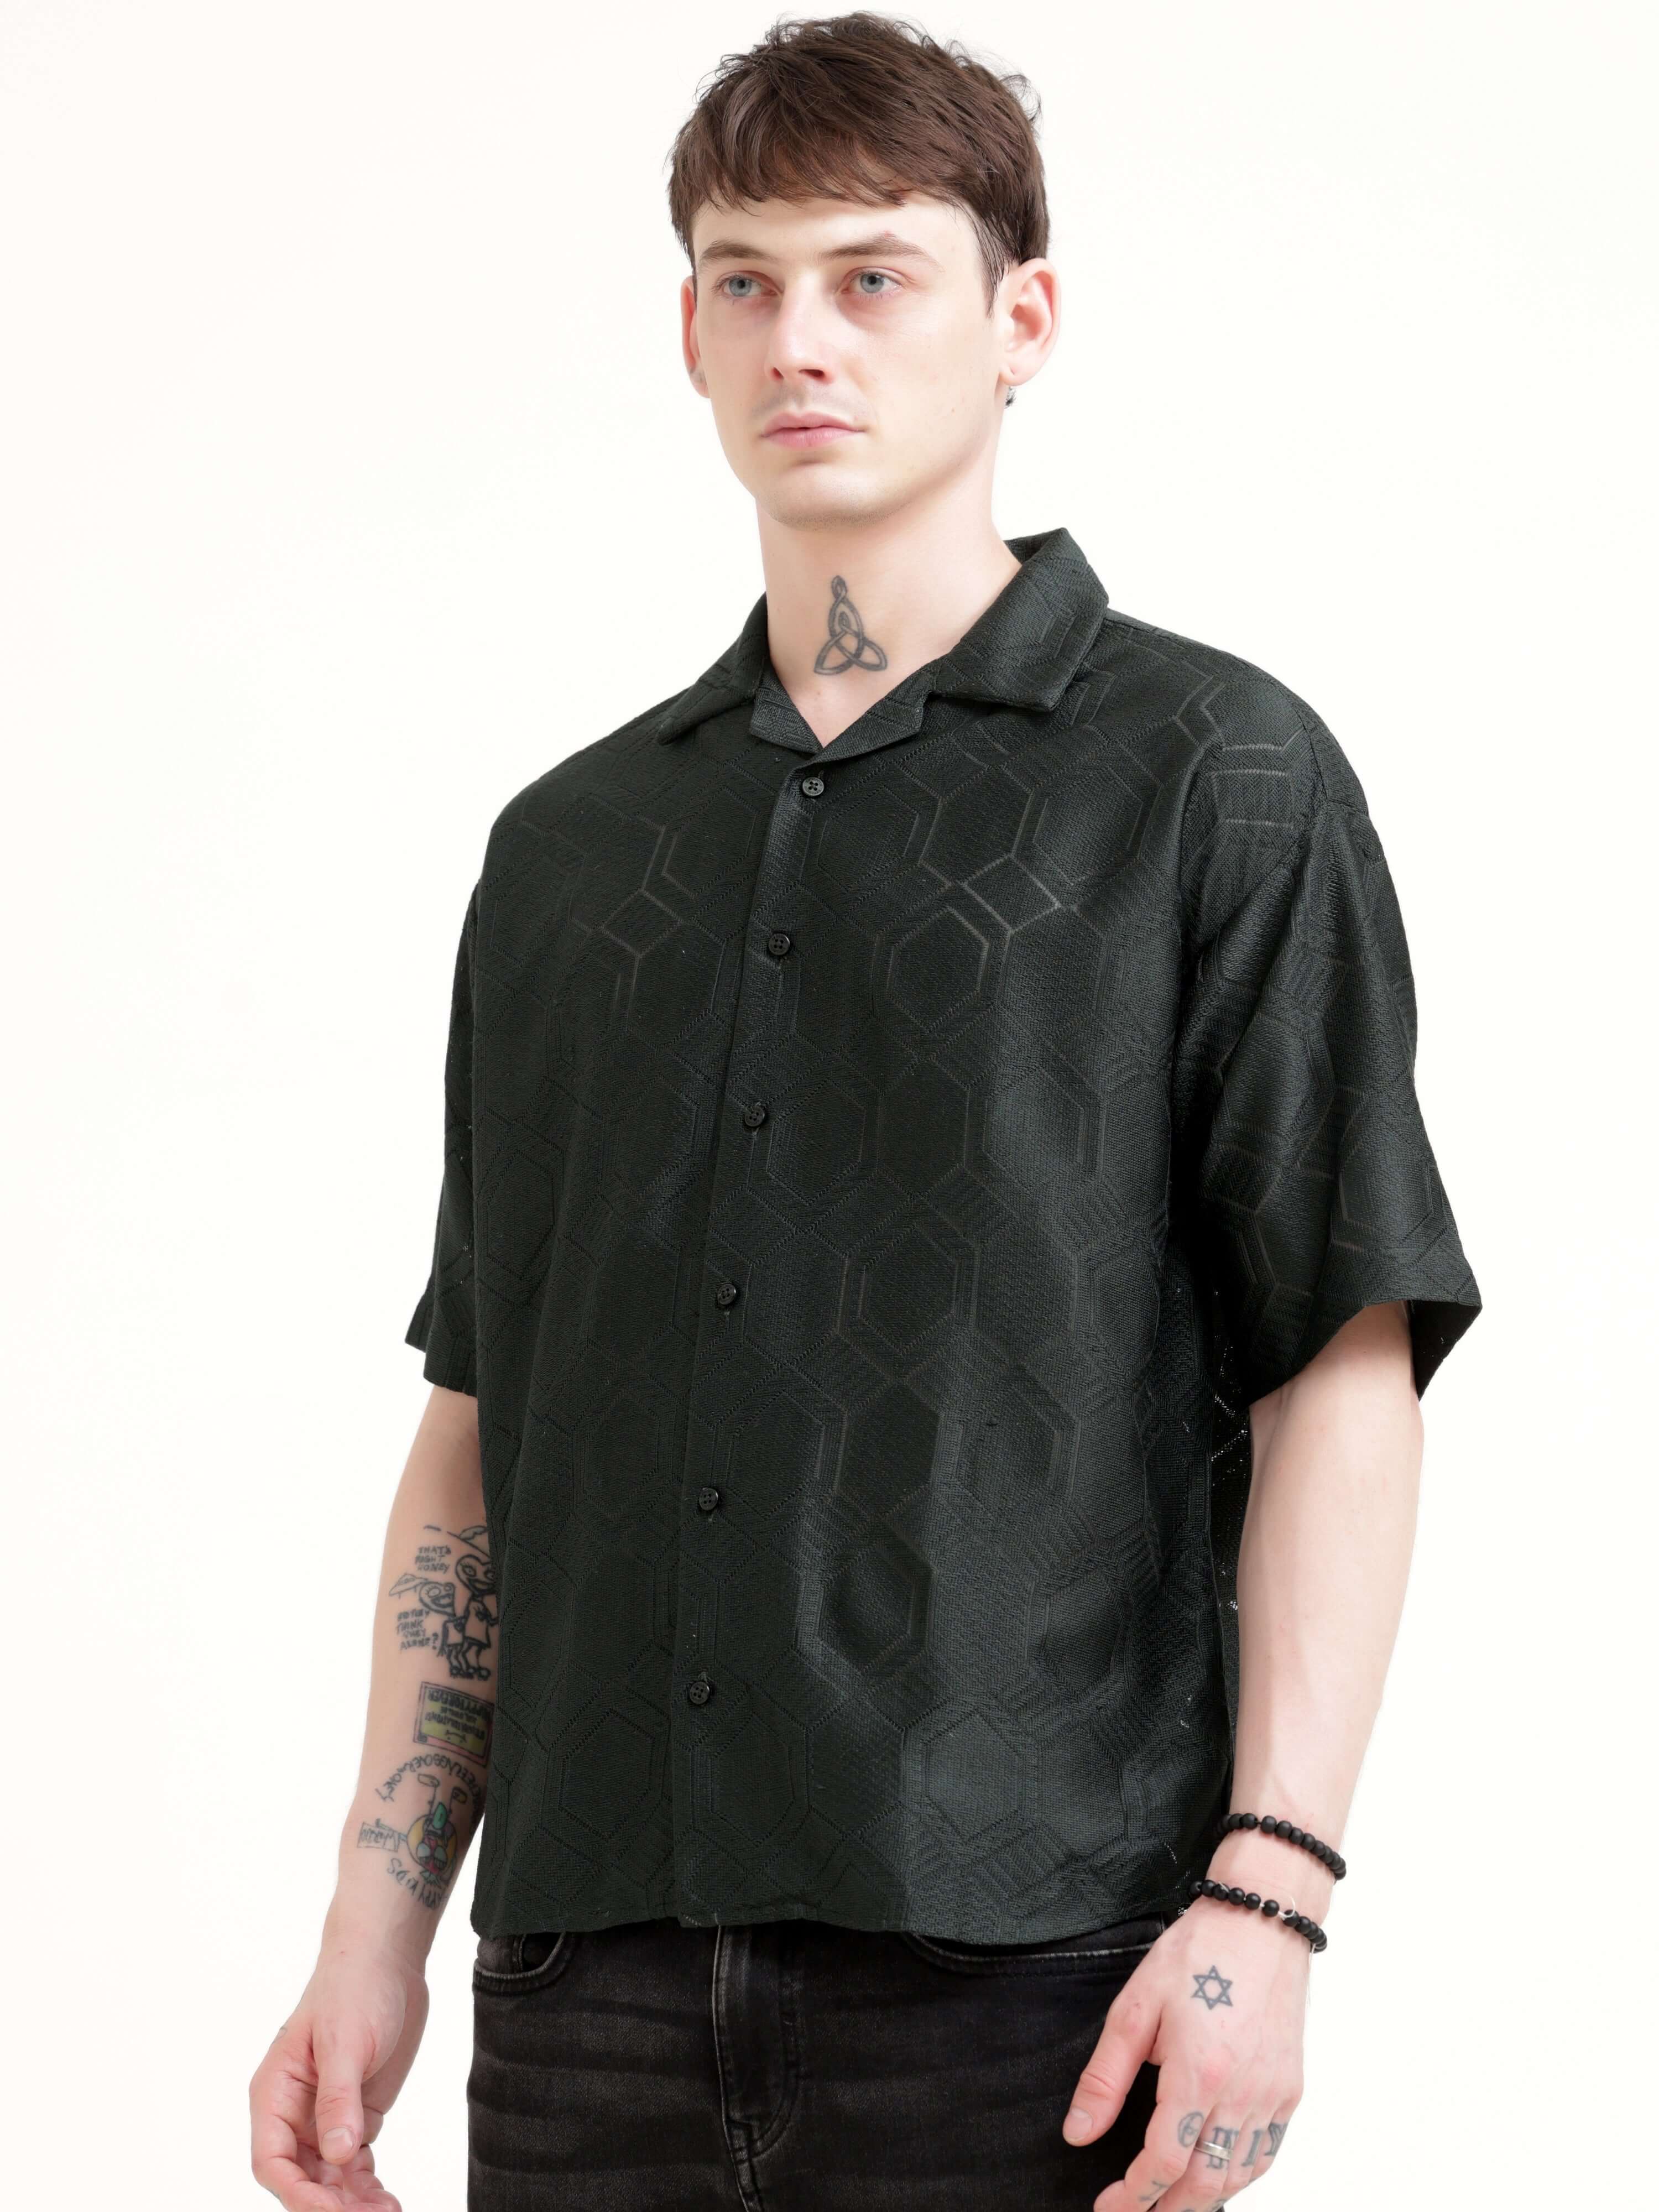 Texturiche quad green crochet oversized shirt - Men's Casual Wear shop online at Estilocus. Rock summer with our Texturiche quad green crochet shirt! Perfect for a relaxed, stylish look. Comfy, oversized fit for all-day wear.